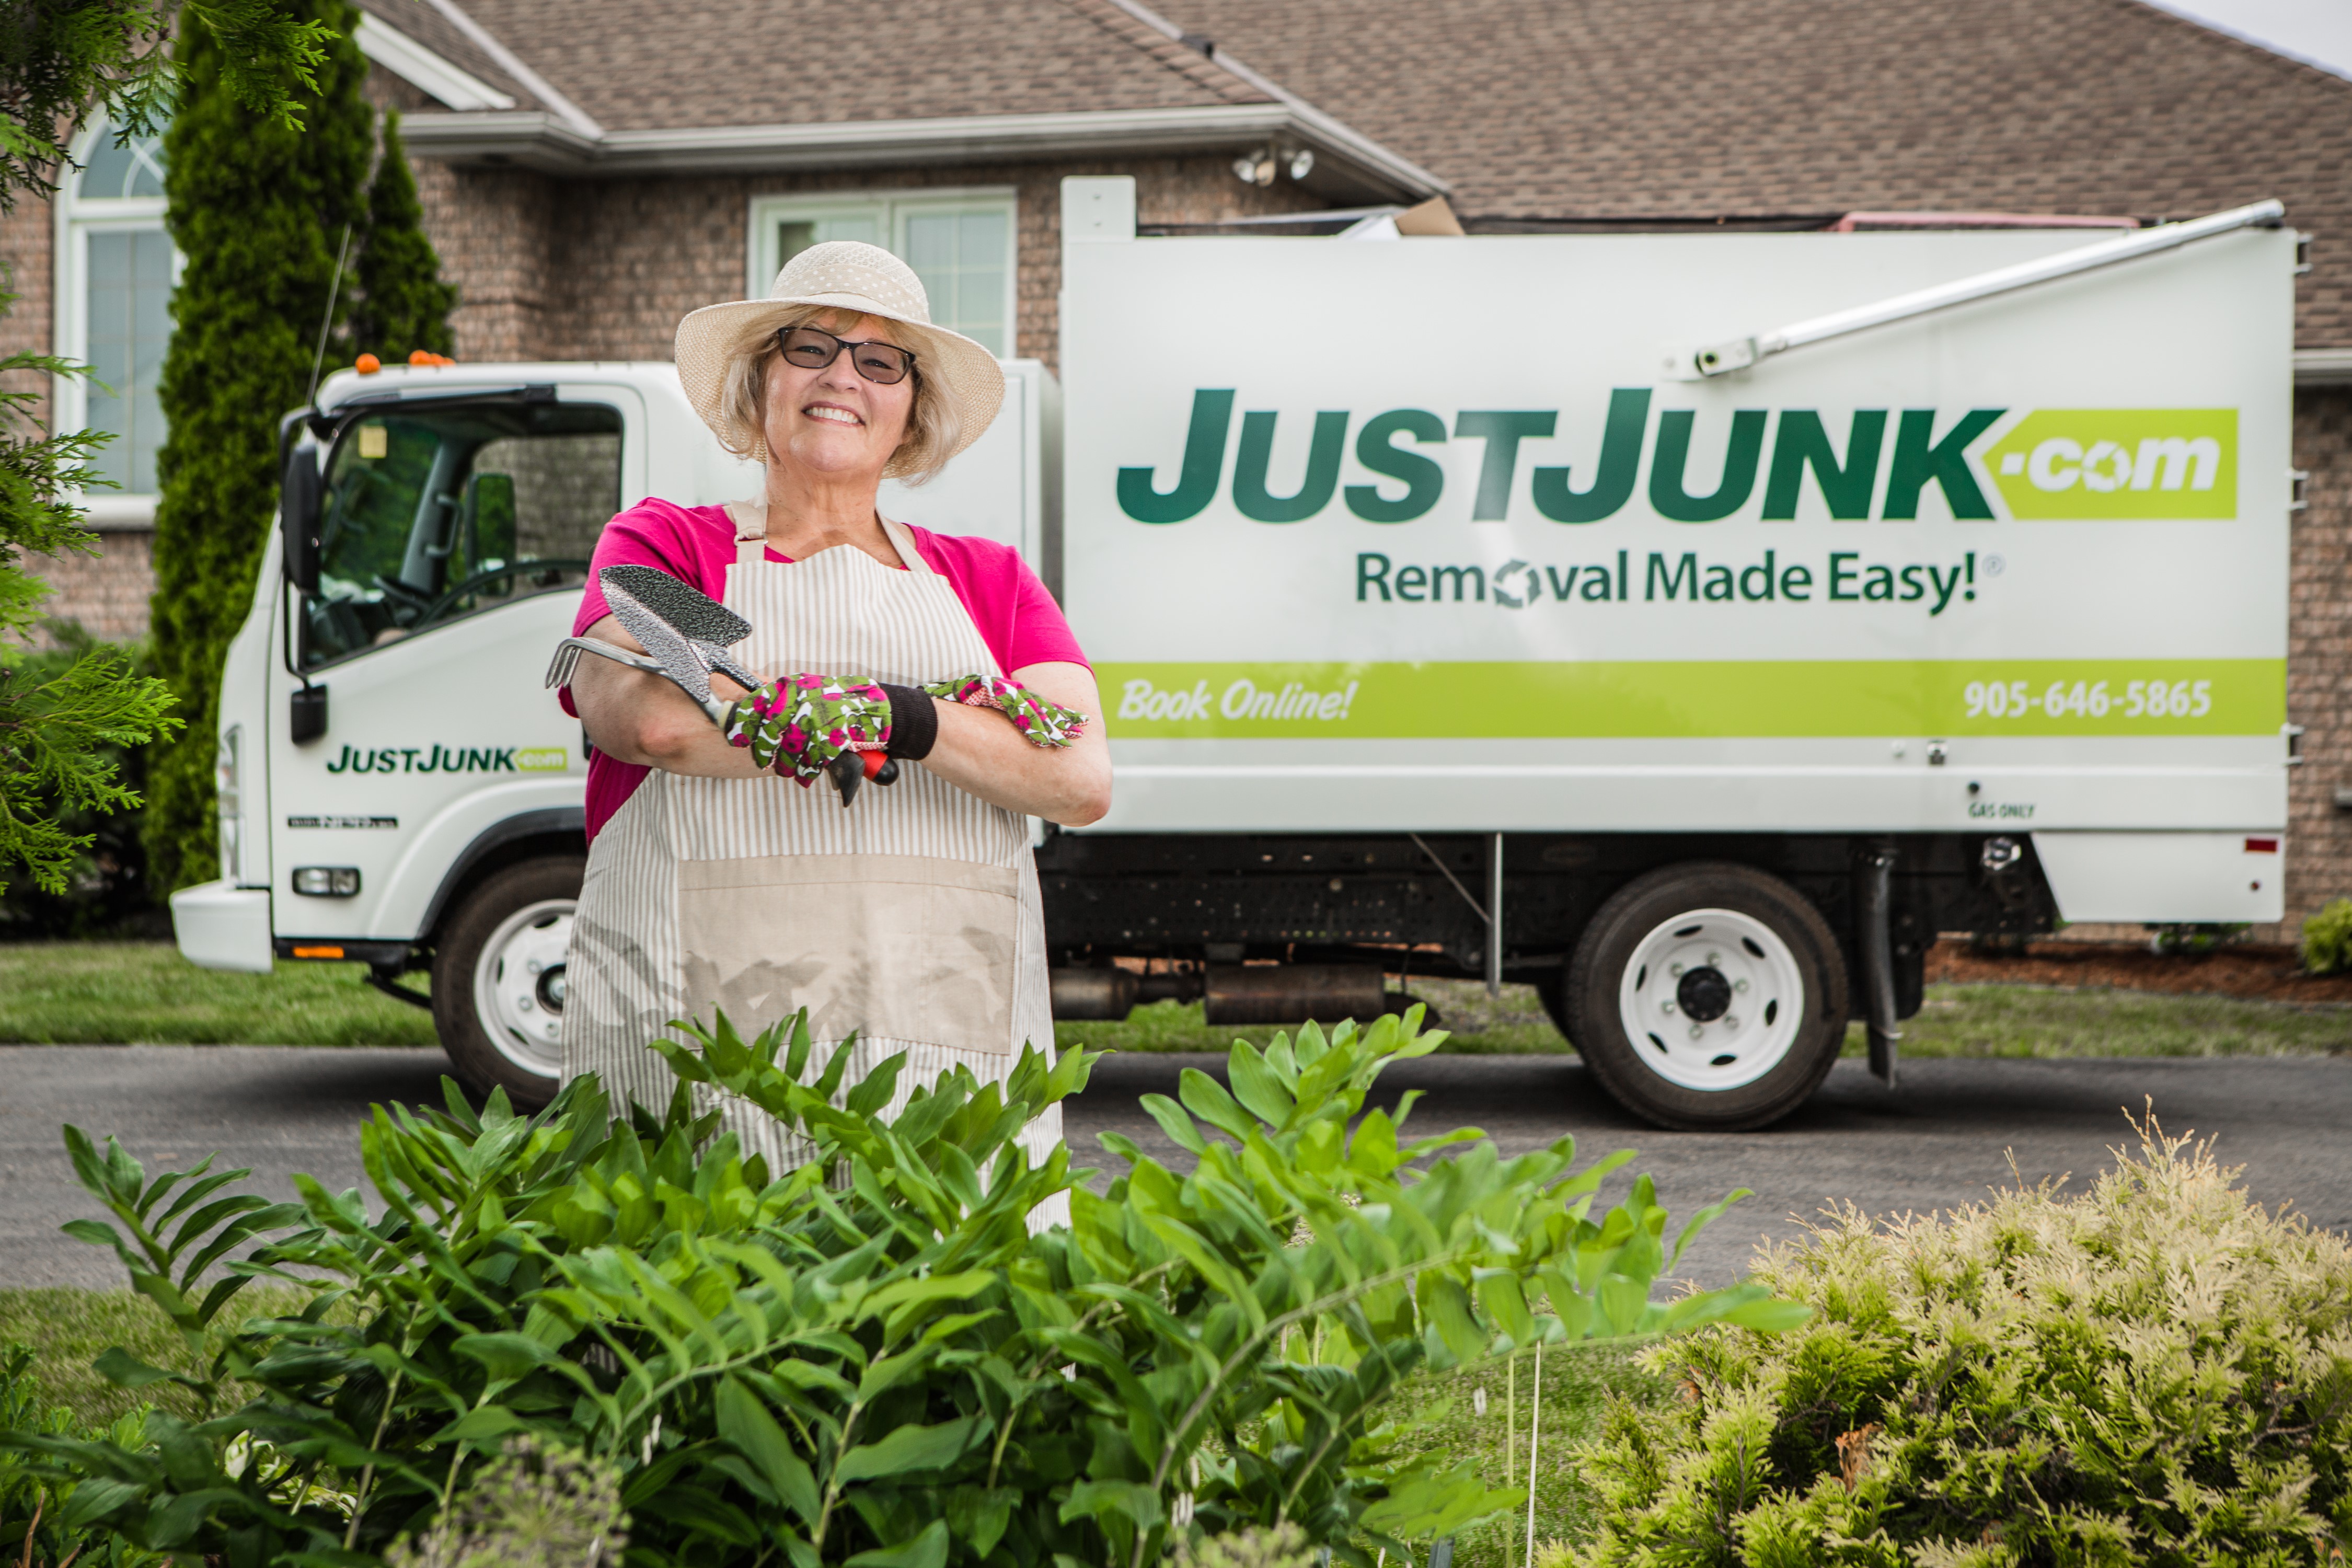 Just Junk Service - Junk Removal and Downsizing in Toronto